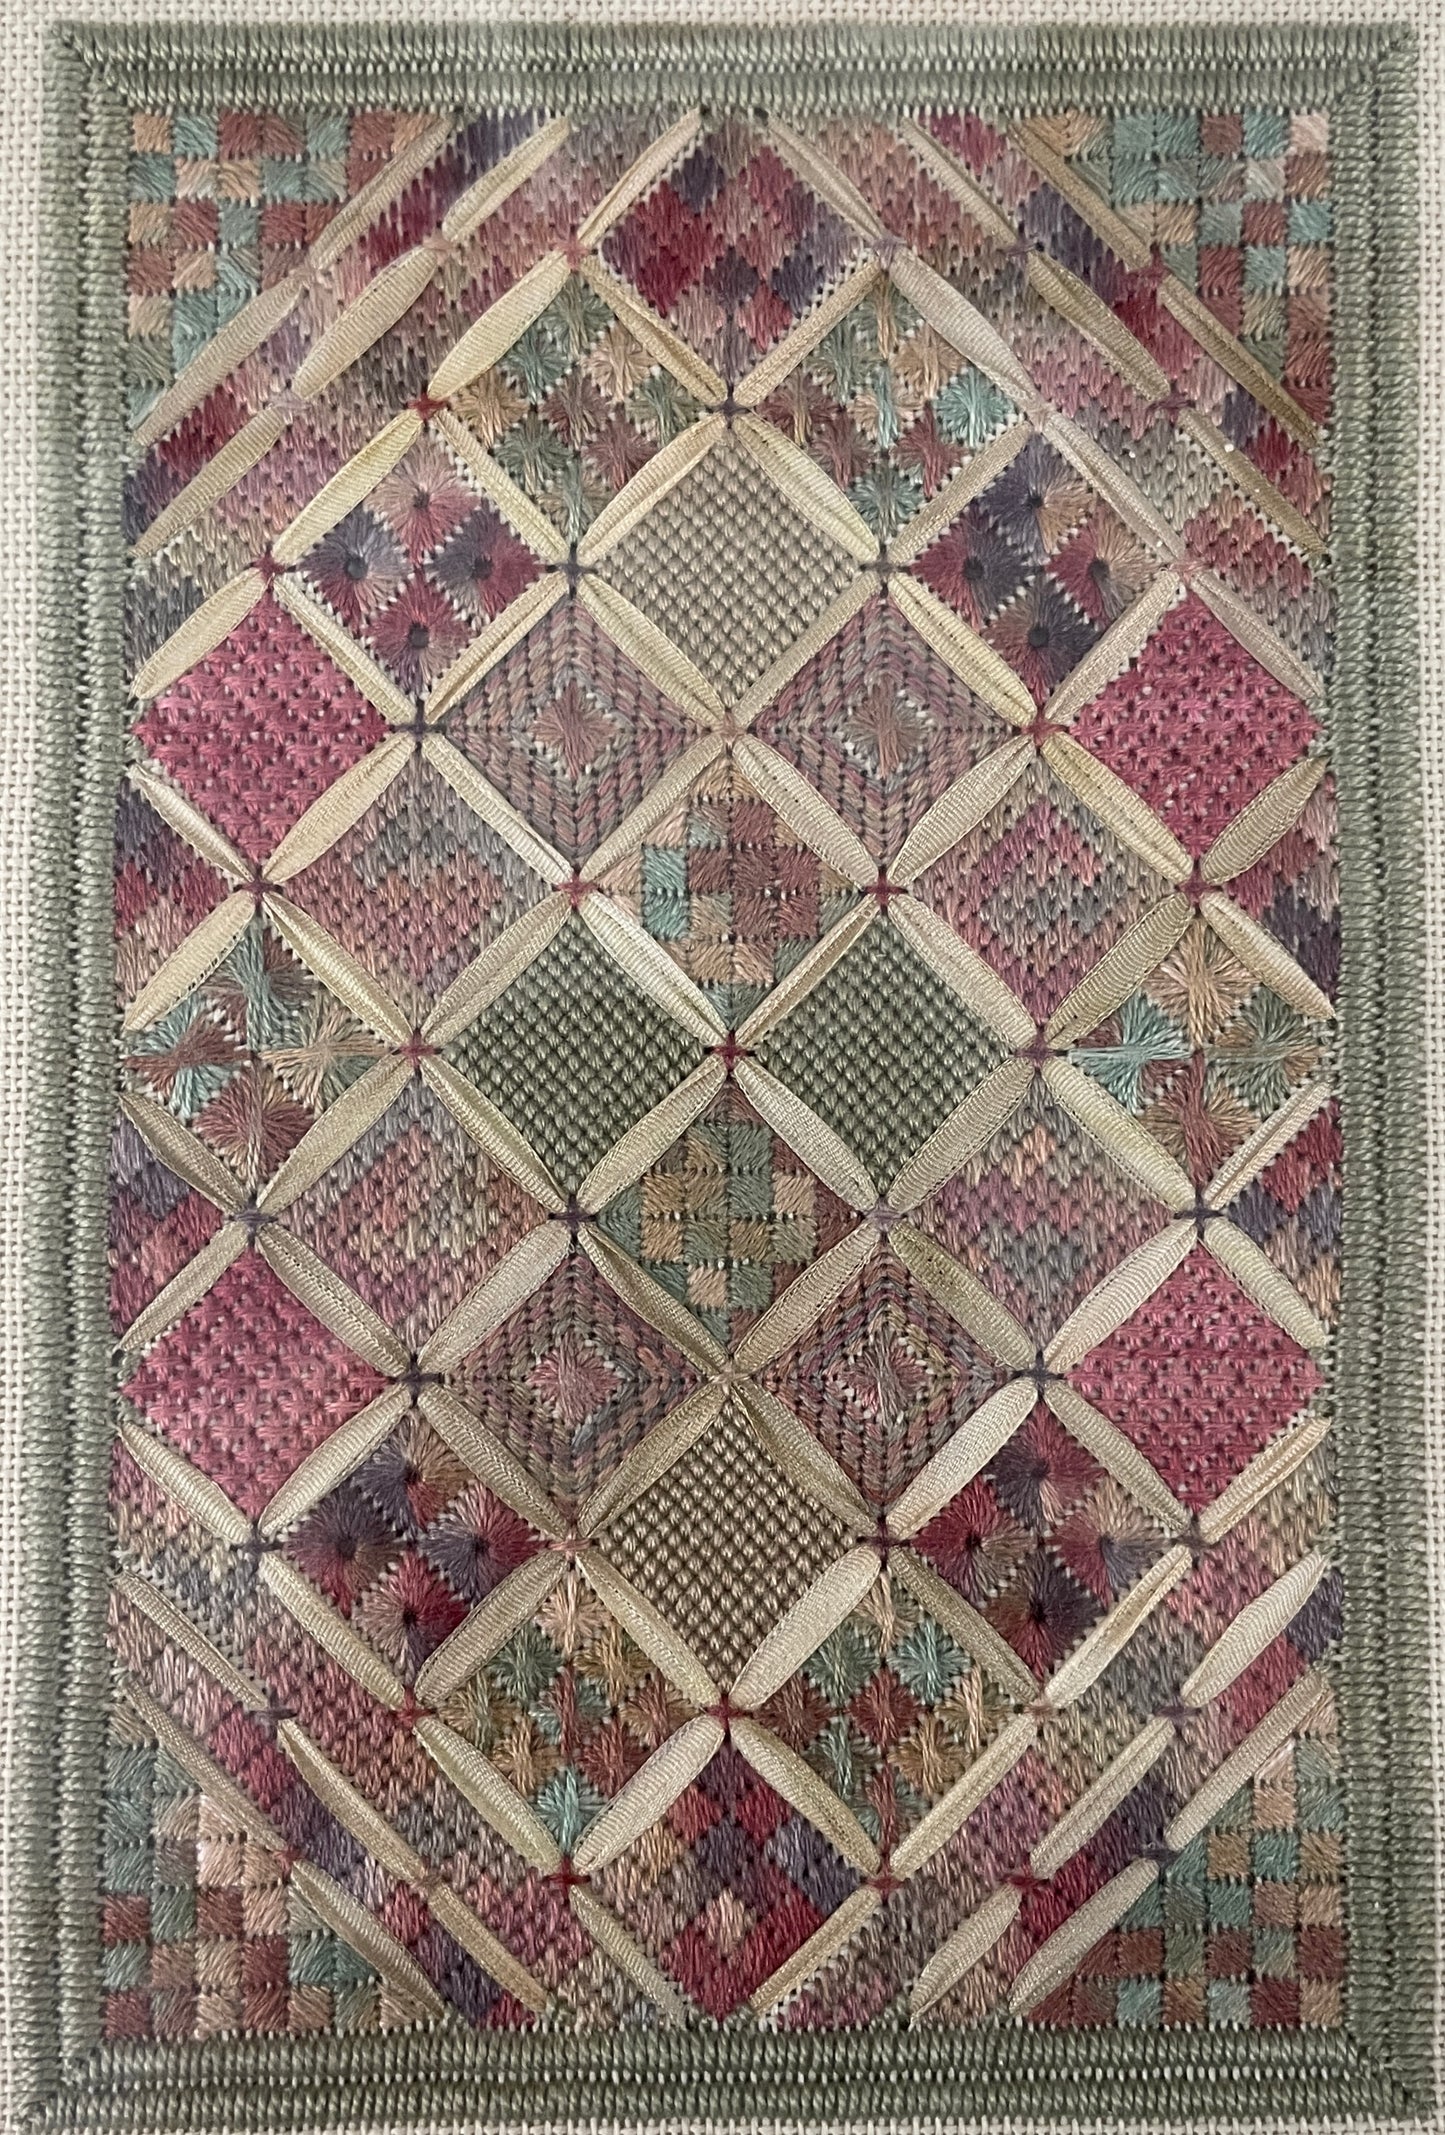 60   My Grandma's Quilt (old pattern format)